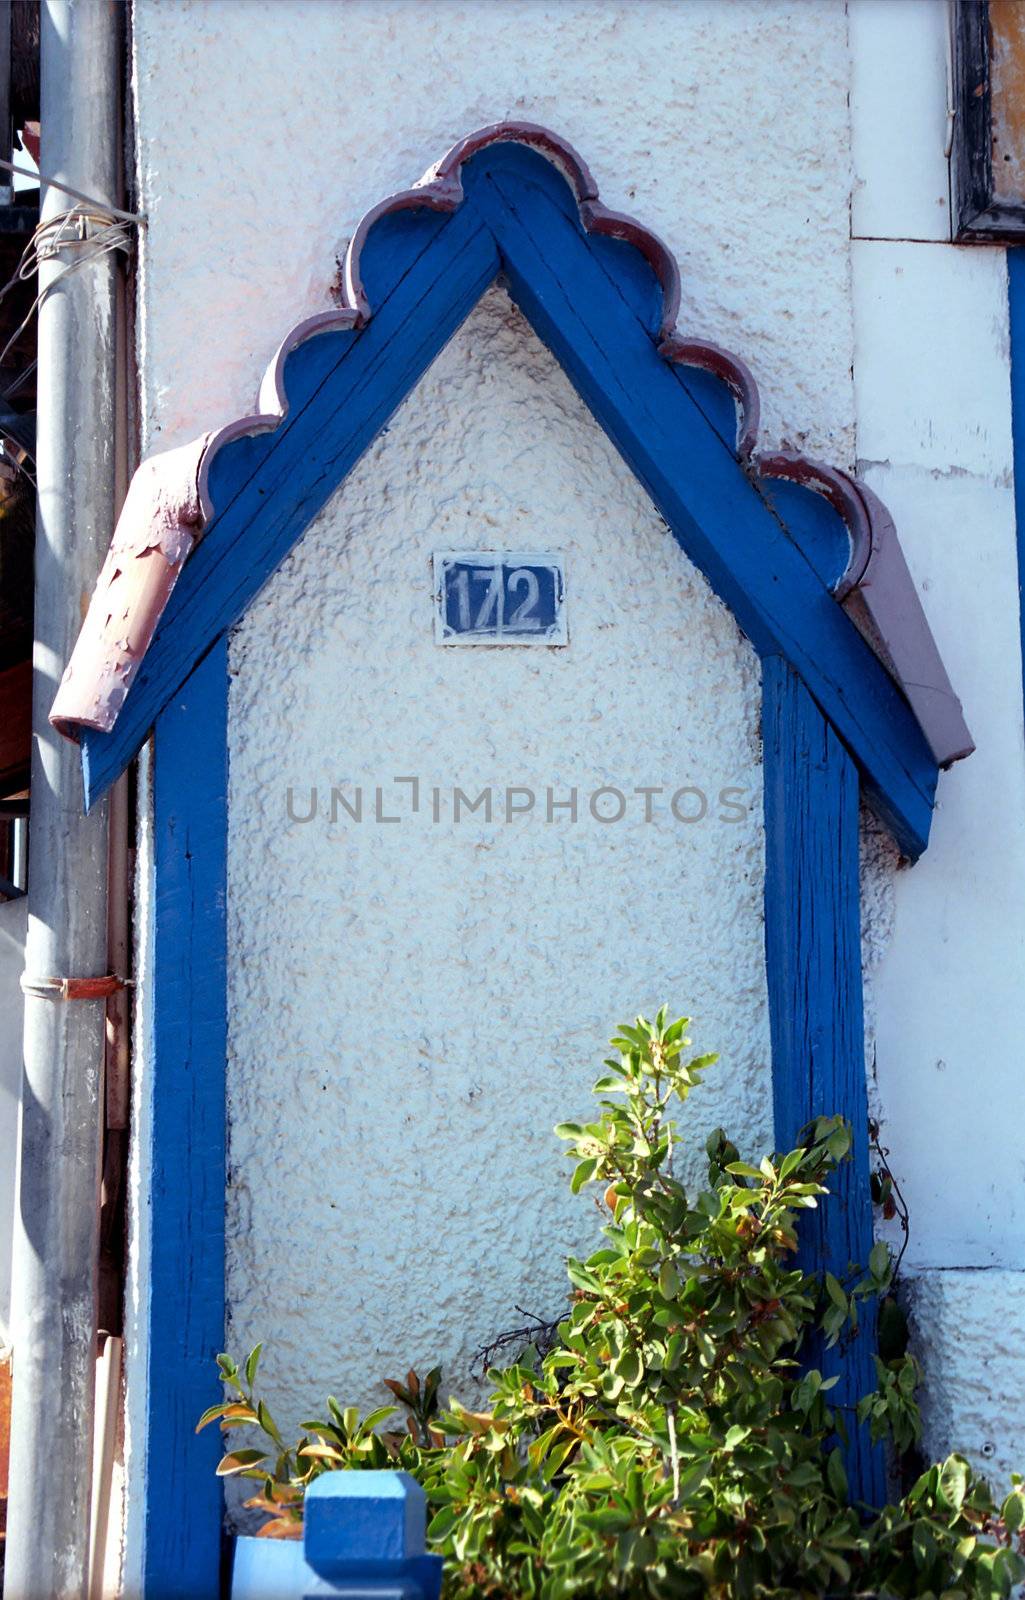 Fragment of a house and its number